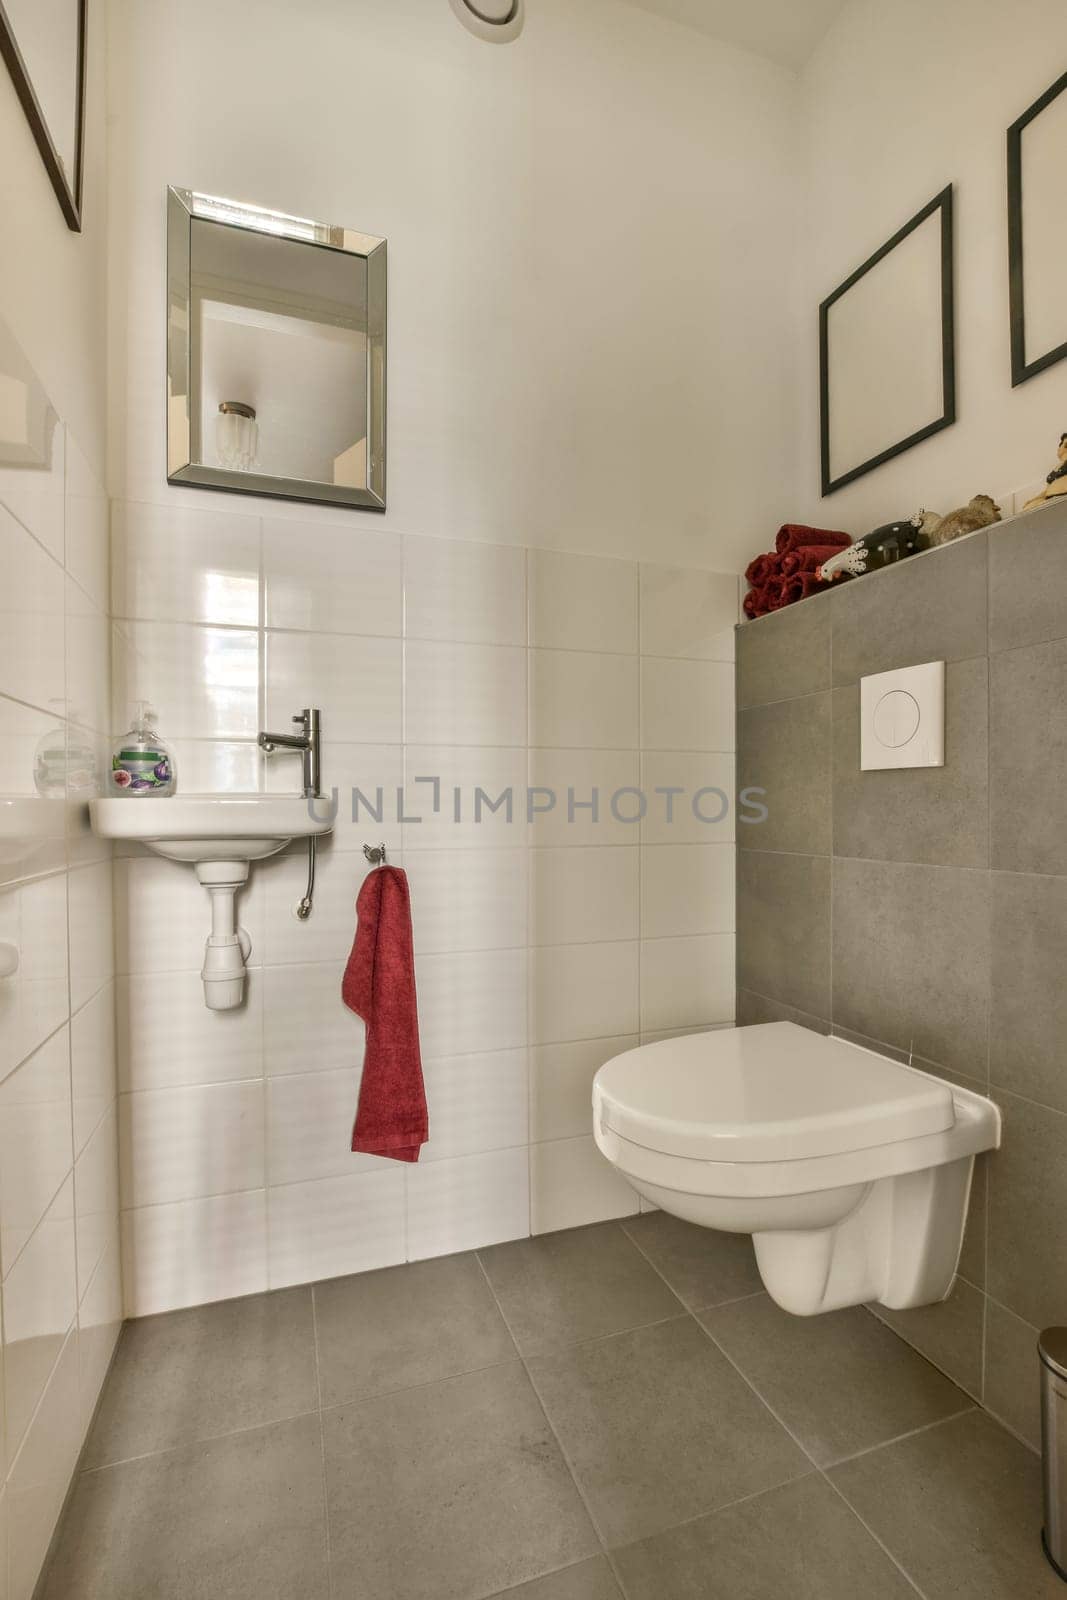 a bathroom with a toilet, sink and mirror hanging on the wall above it is a red towel next to the toilet